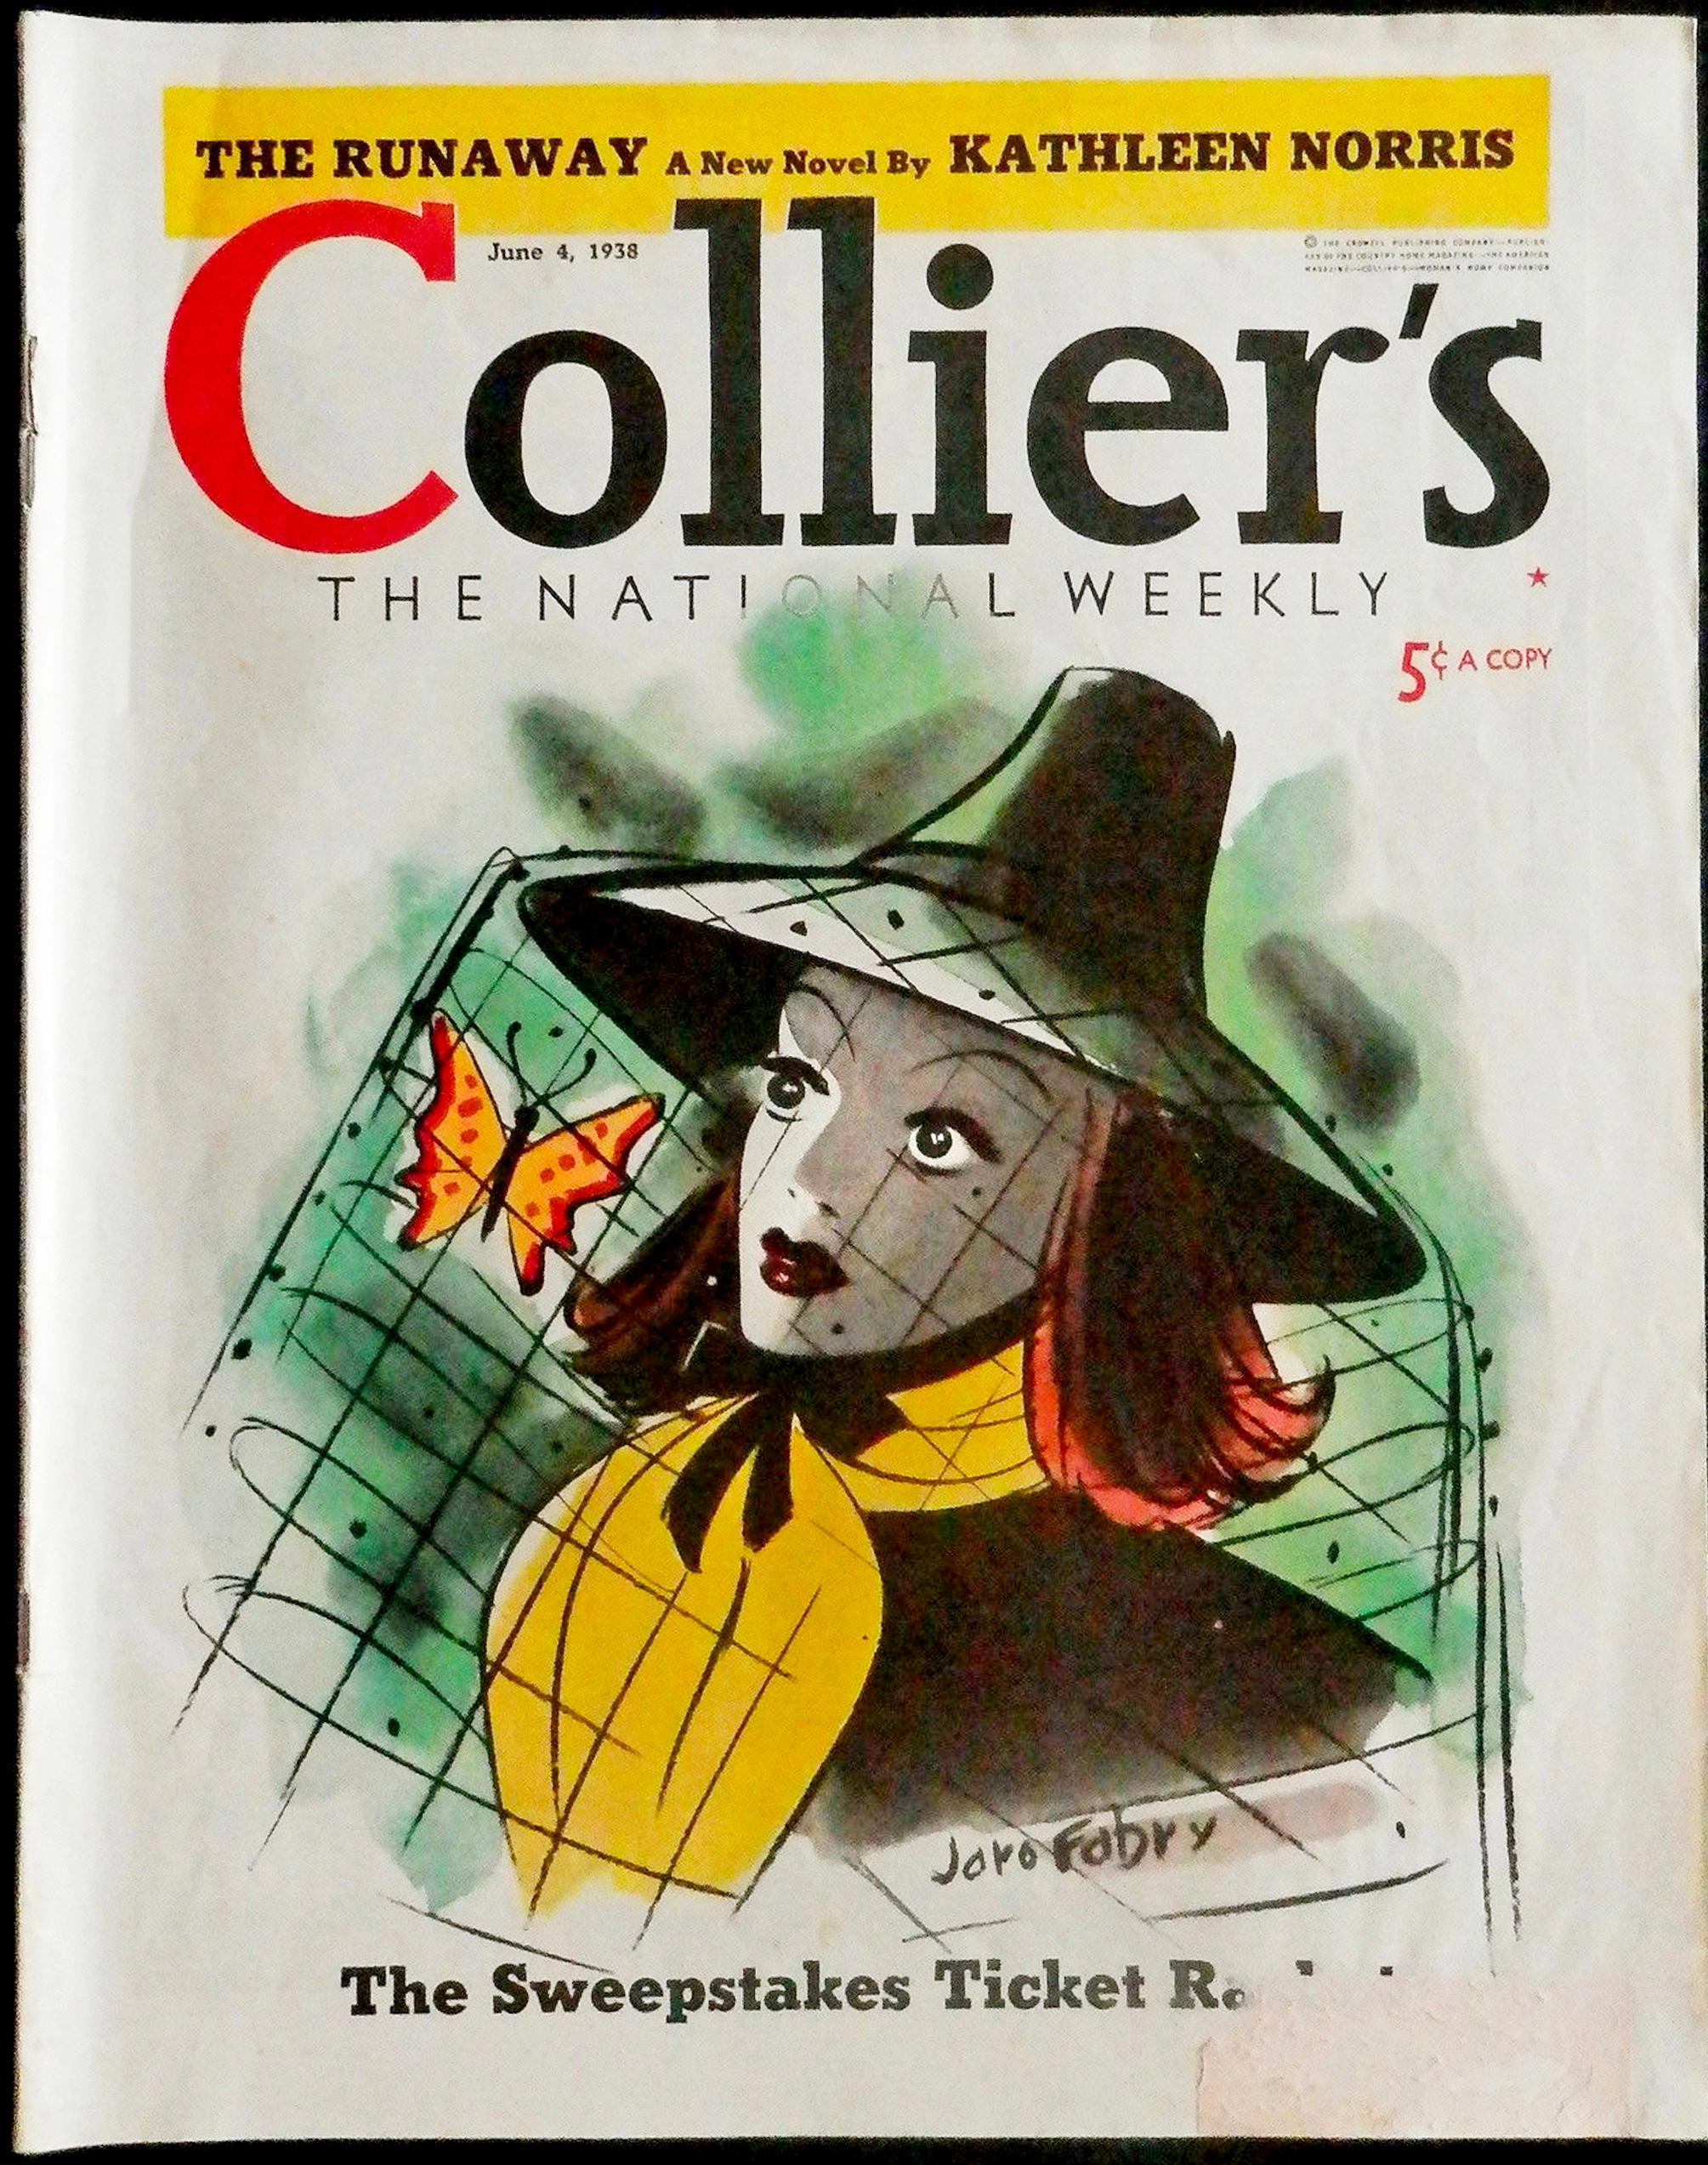 Woman with a butterfly in her hat. Colliers Magazine Cover - Art by Jaro Fabry